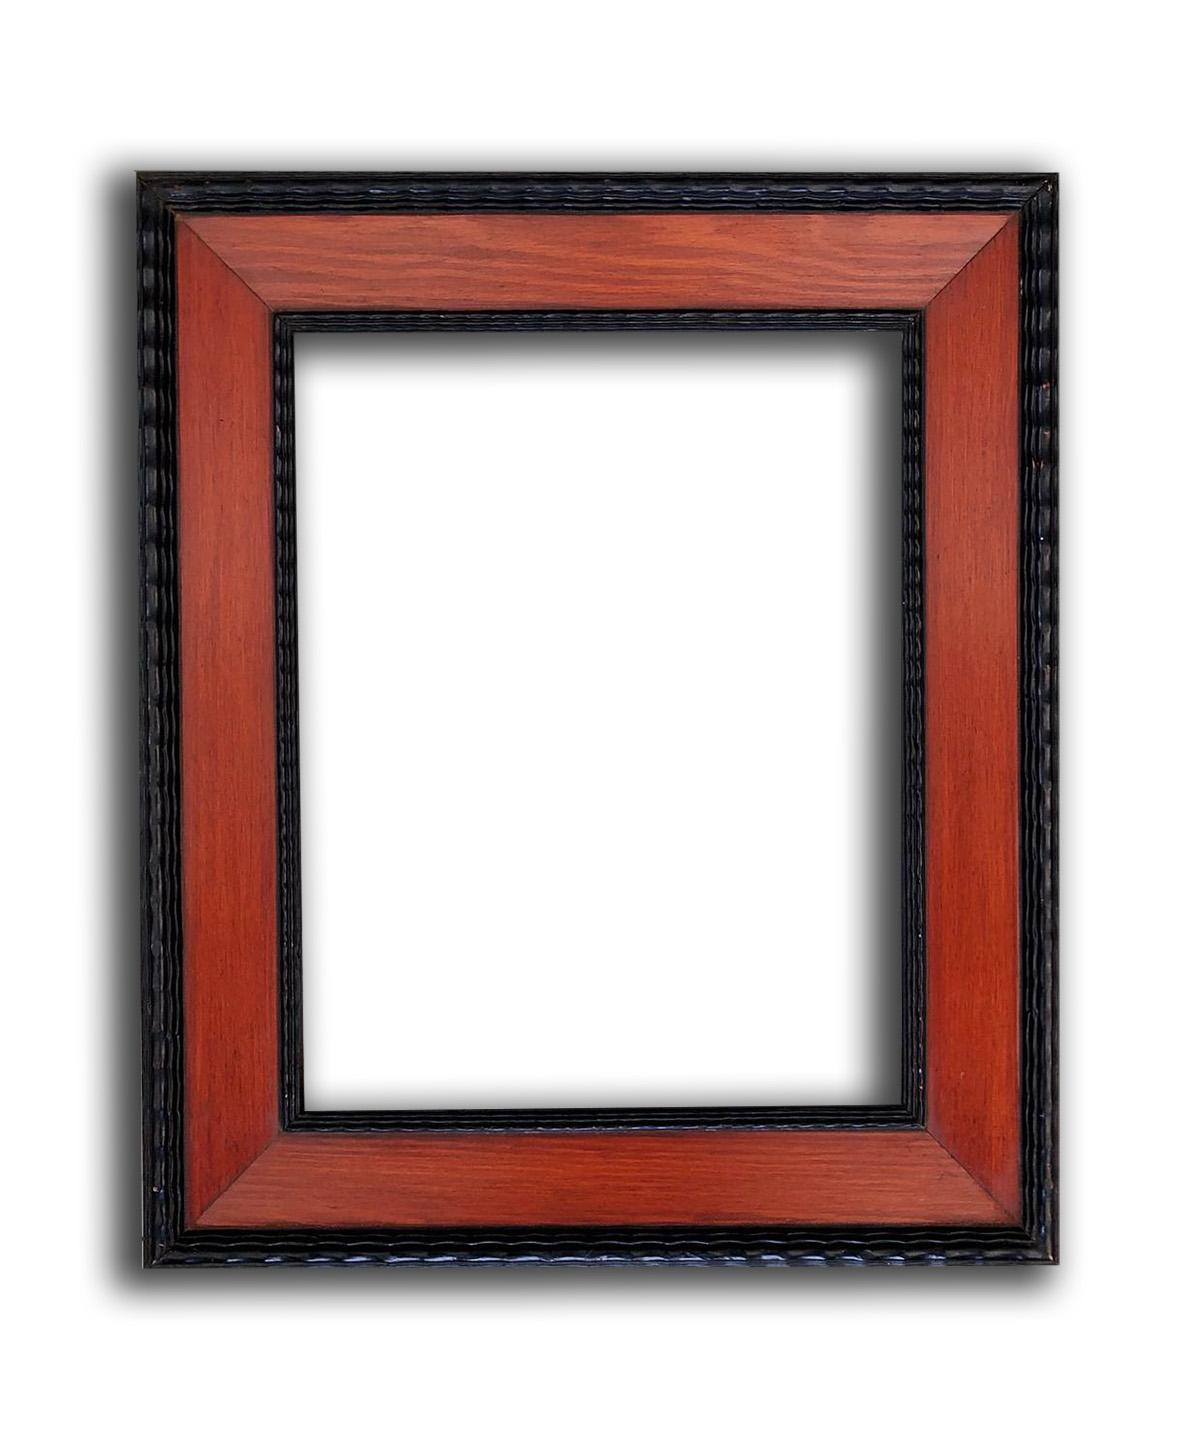 28x35 cm or 11x14 ins, wooden photo frame